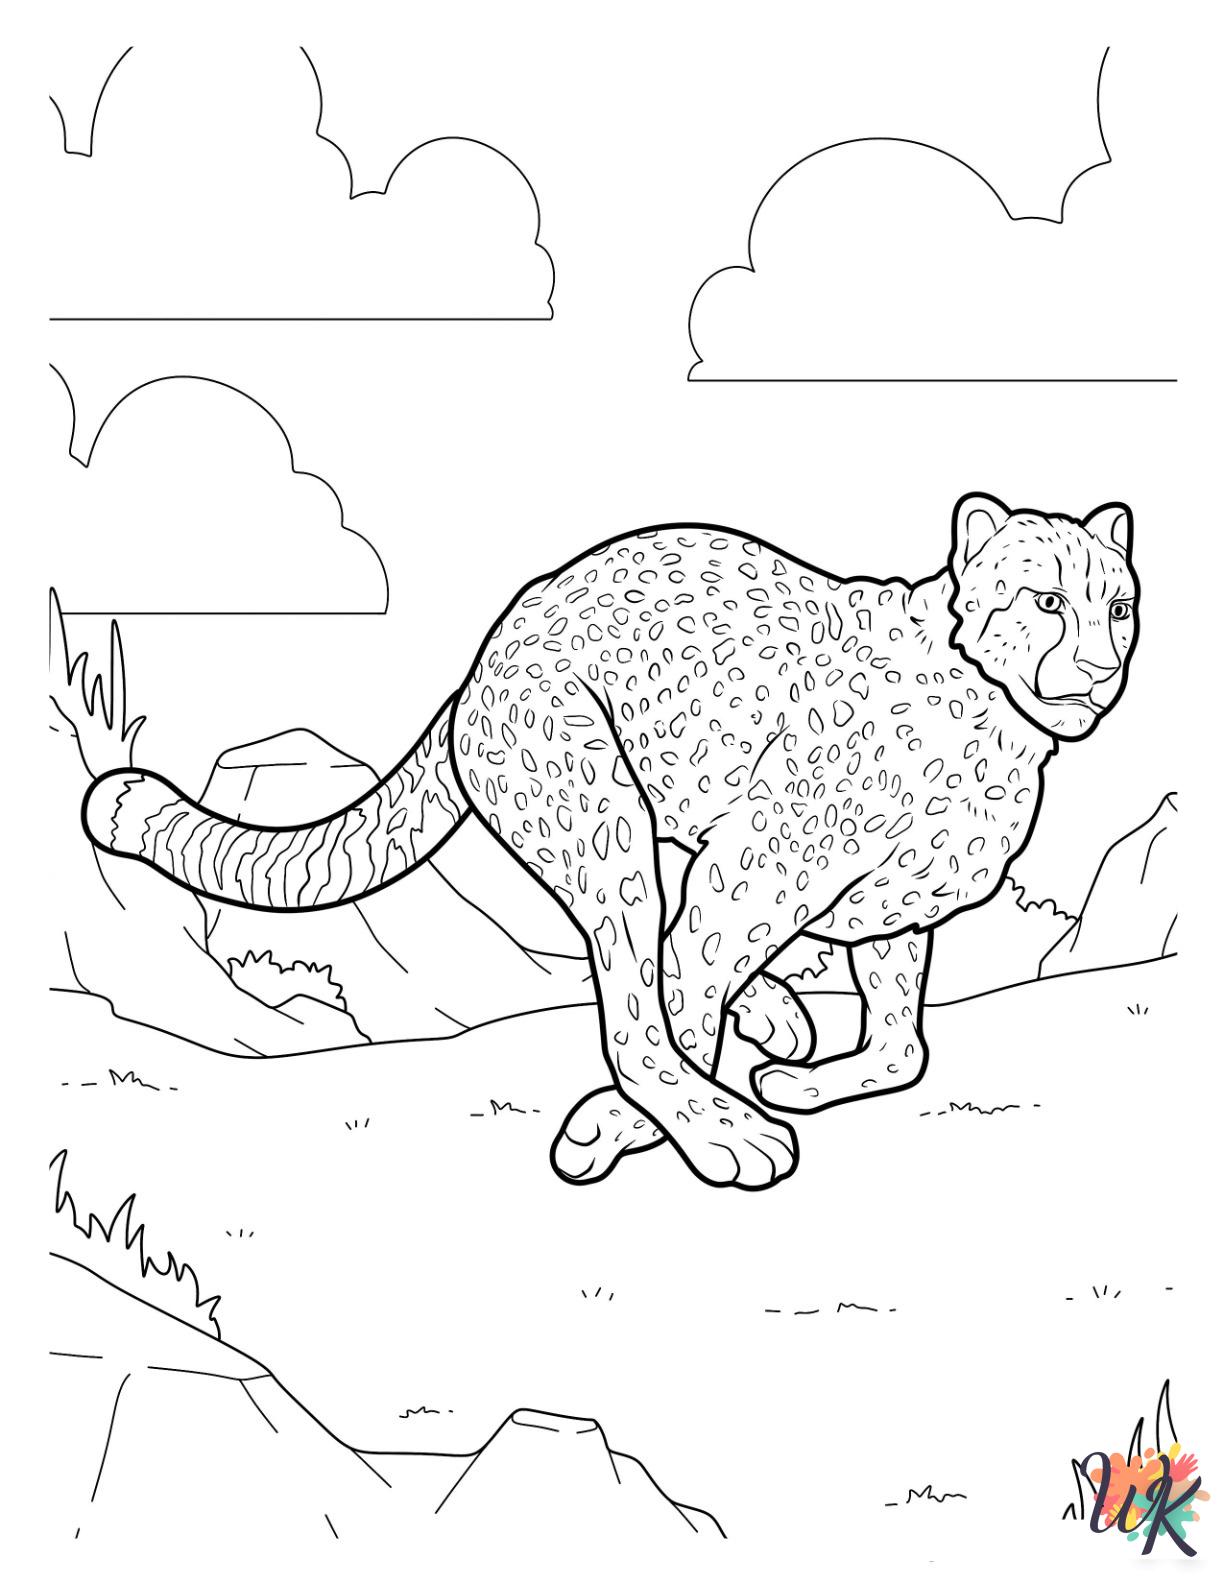 Cheetah coloring pages for kids